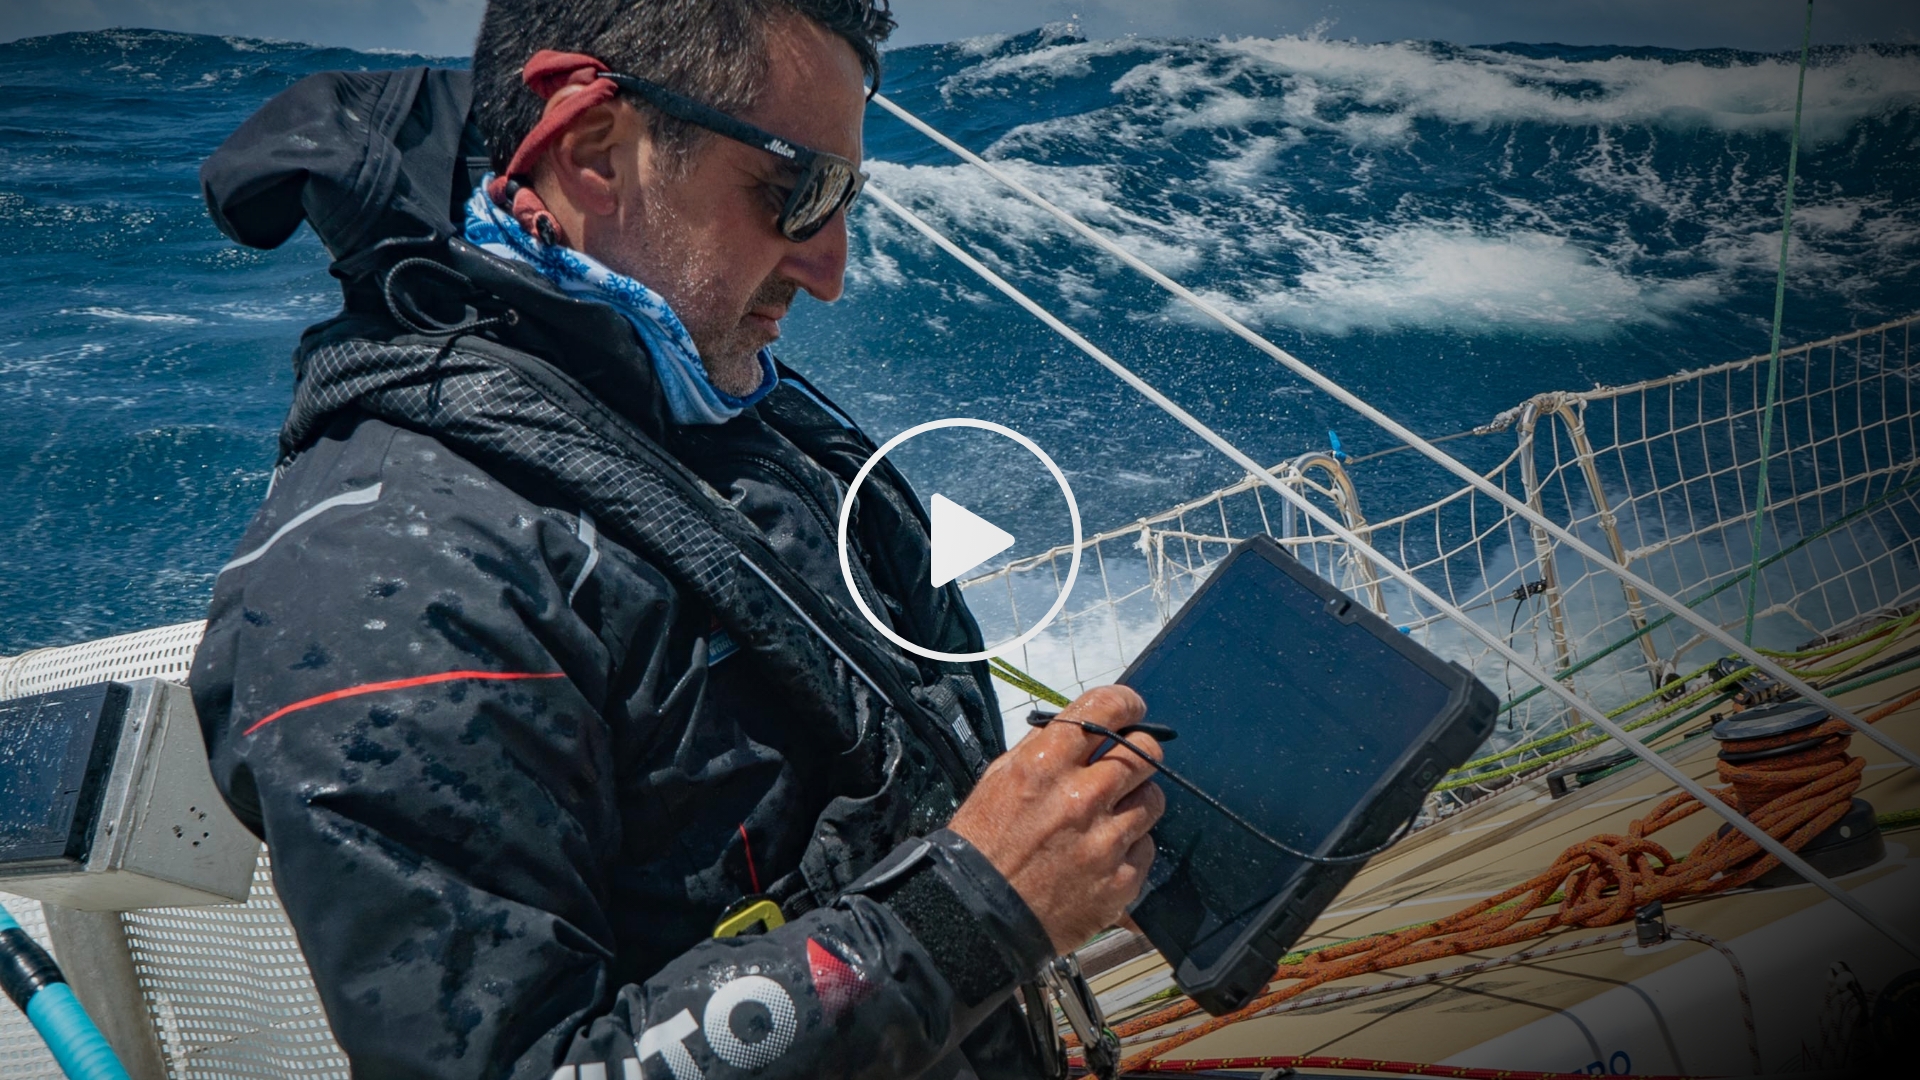 Dell Technologies X Clipper Round the World Yacht Race